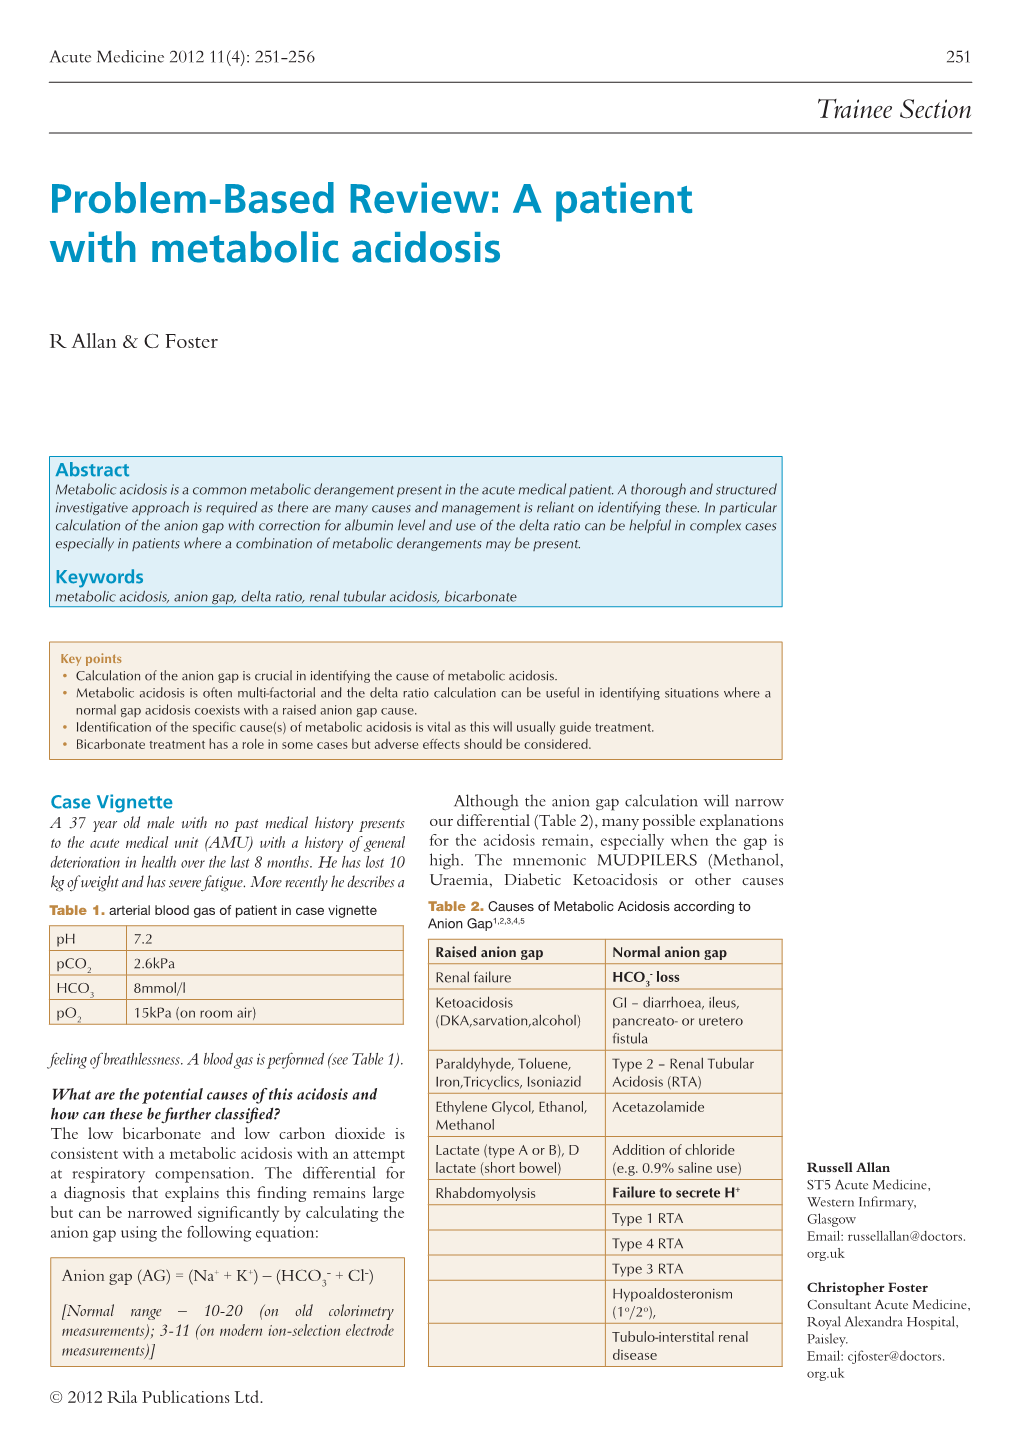 Problem-Based Review: a Patient with Metabolic Acidosis